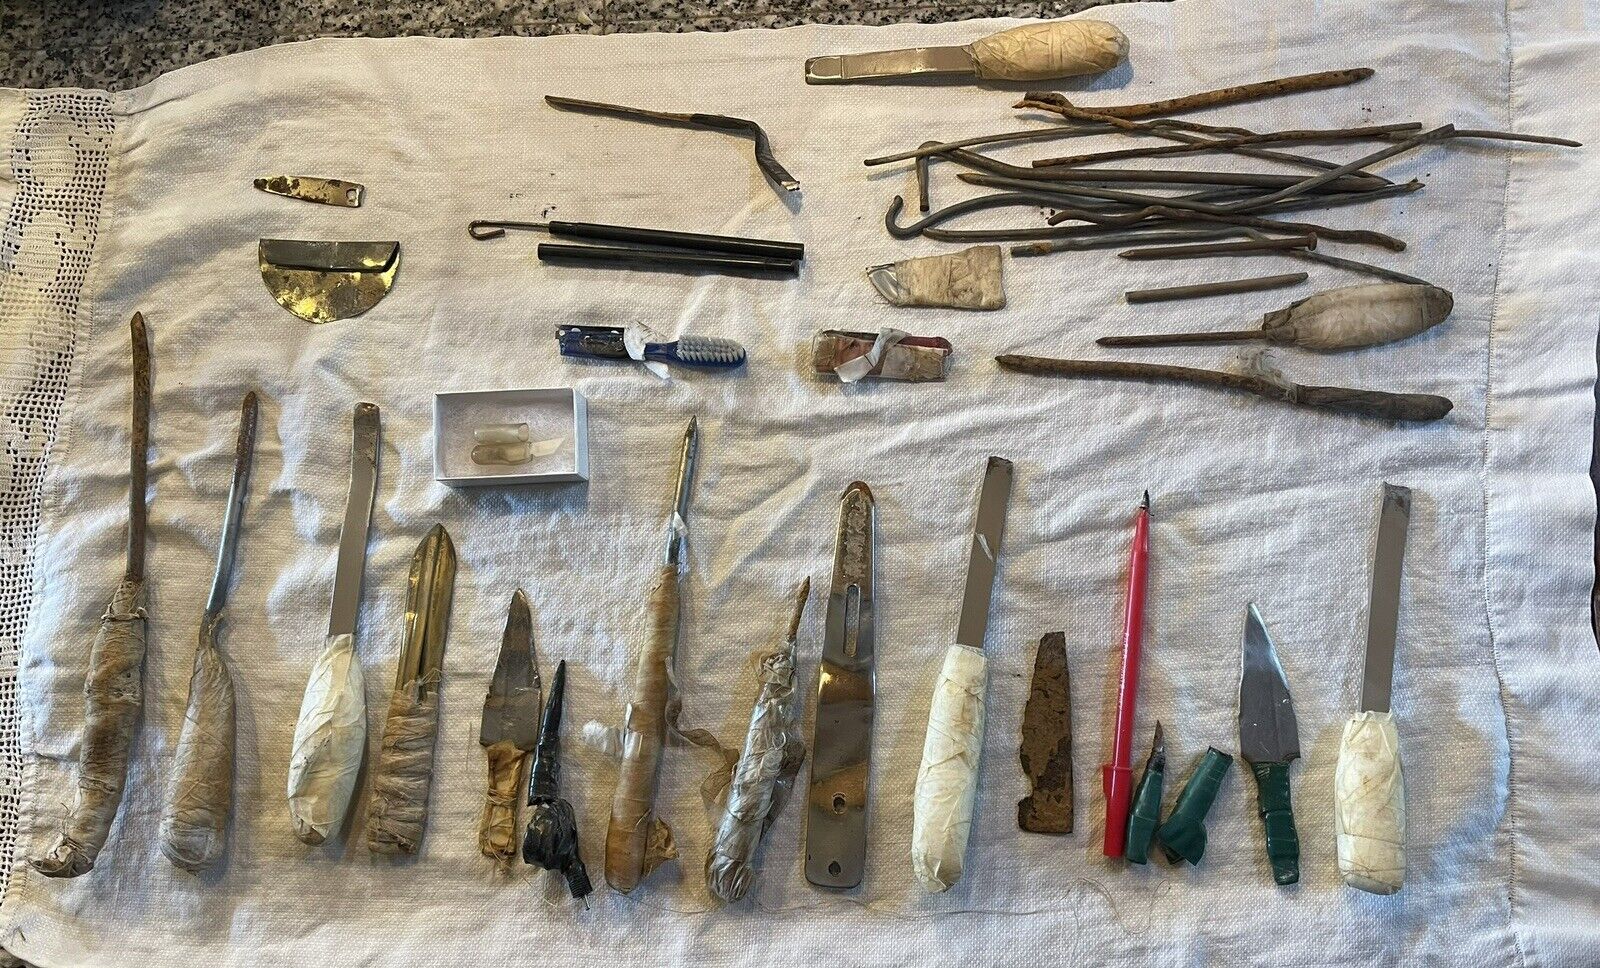 Vintage Collectible Authentic Lot Of 38 Prison Shank, Tattoo Gun, Knives